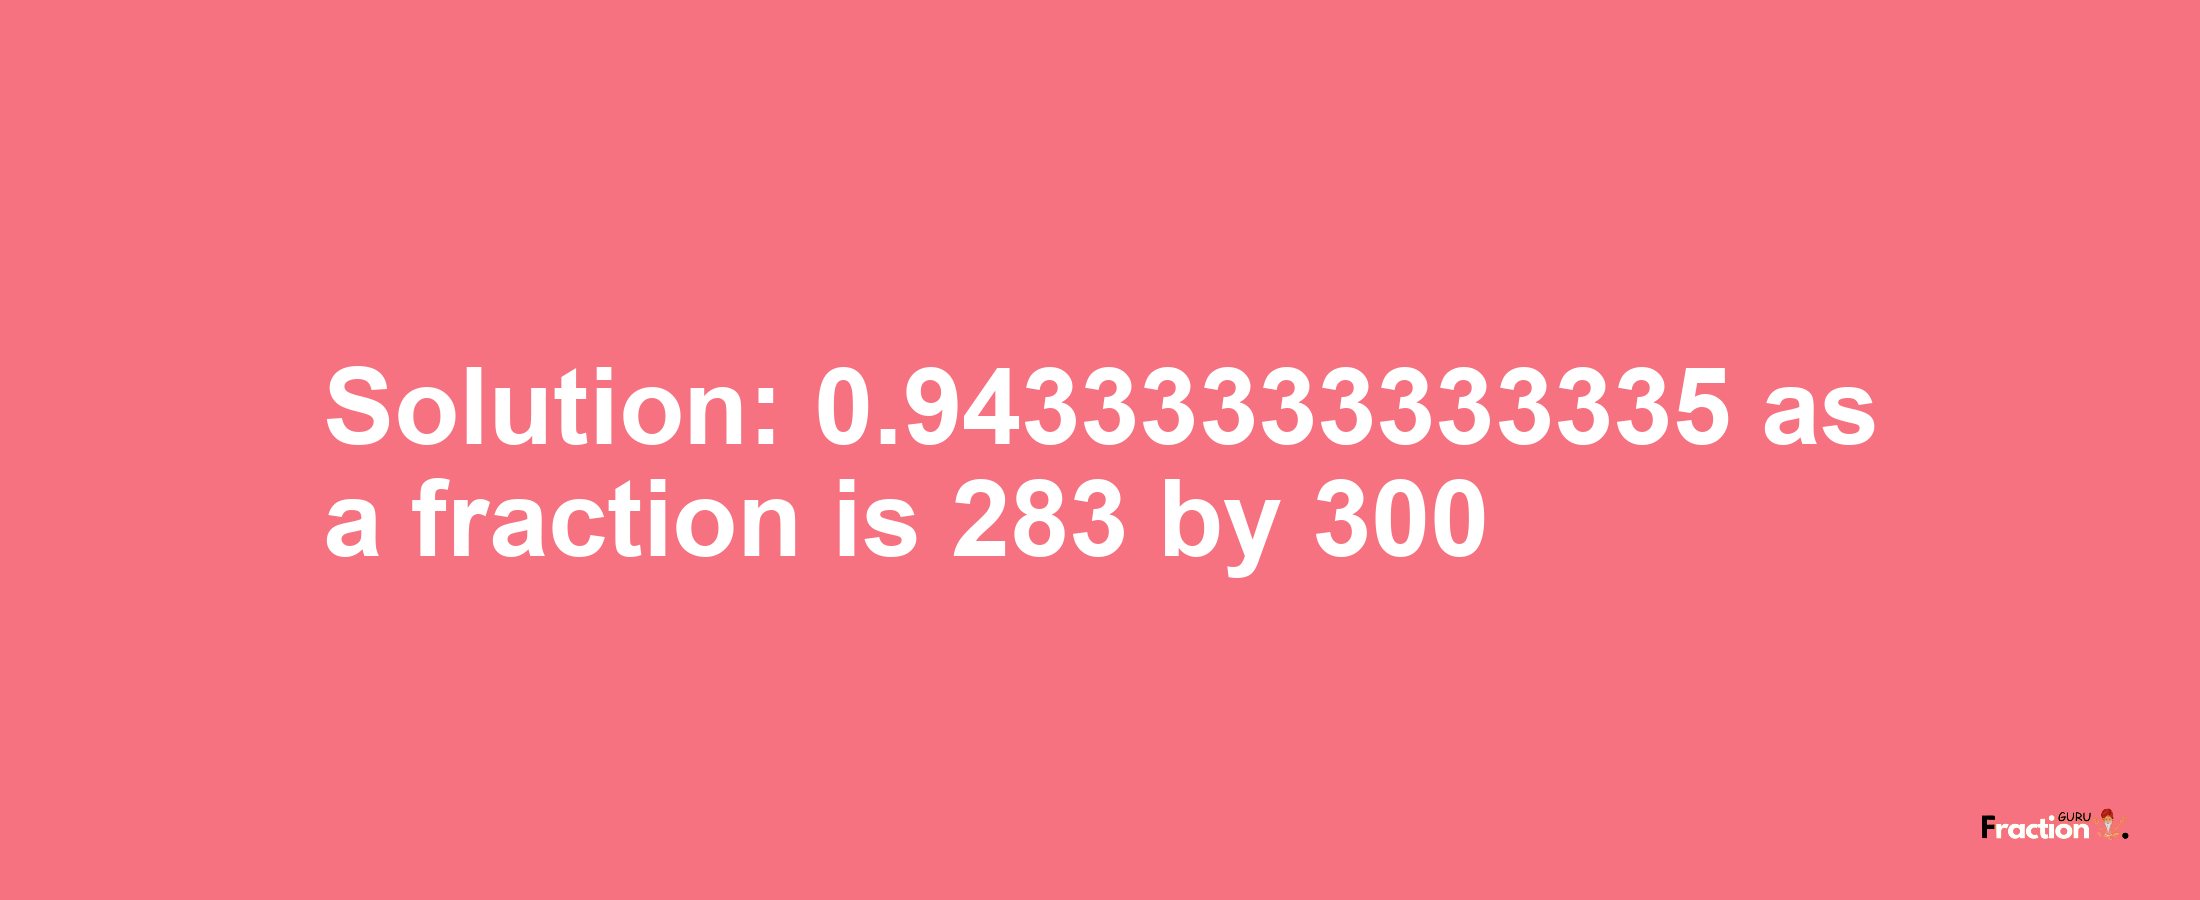 Solution:0.94333333333335 as a fraction is 283/300